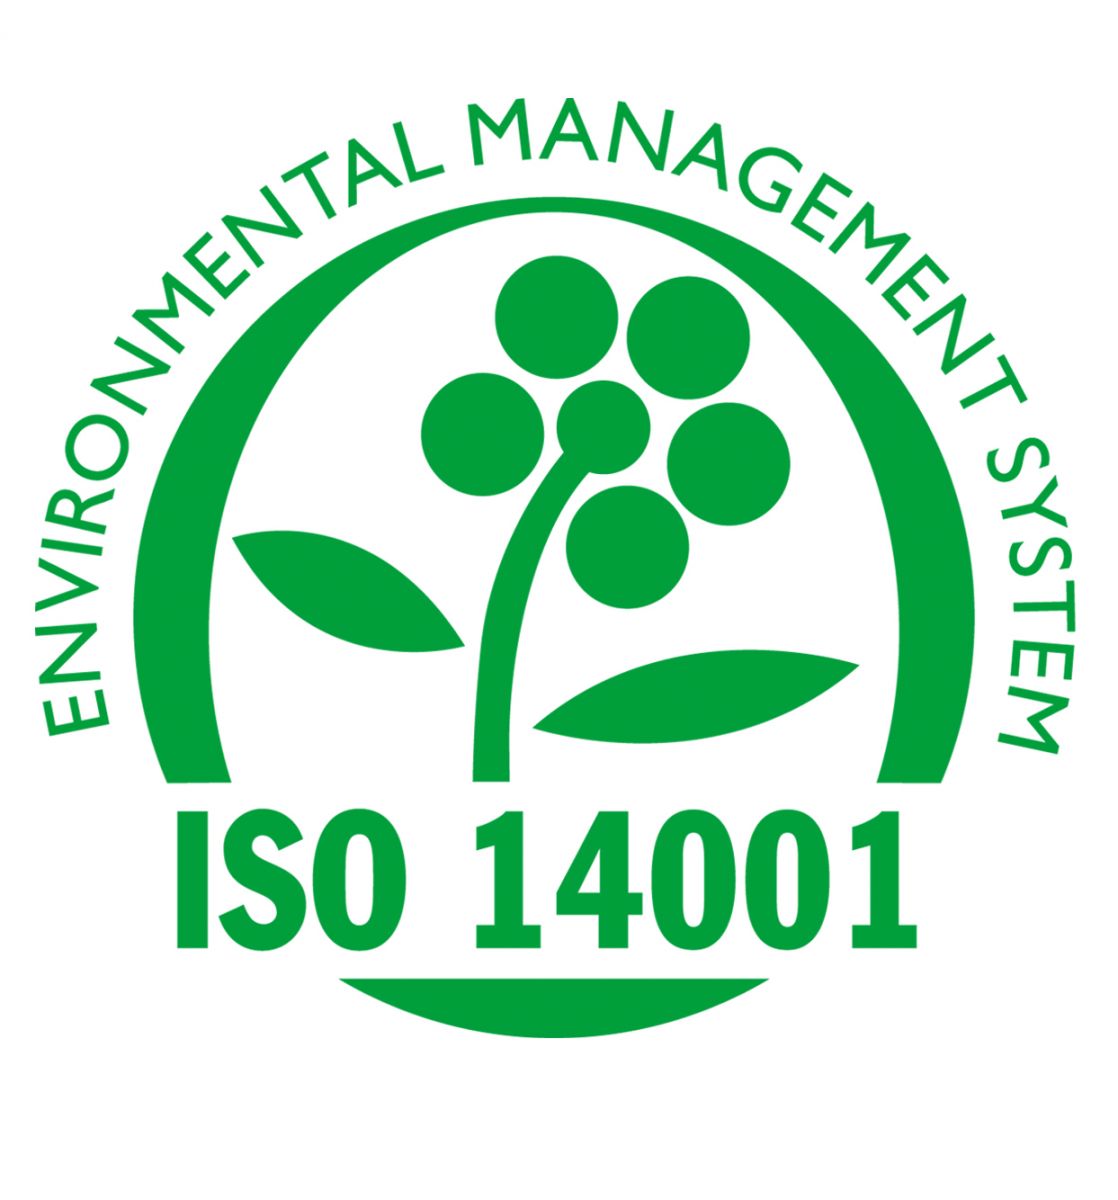 Achieving ISO 14001 Environmental Management System Certification